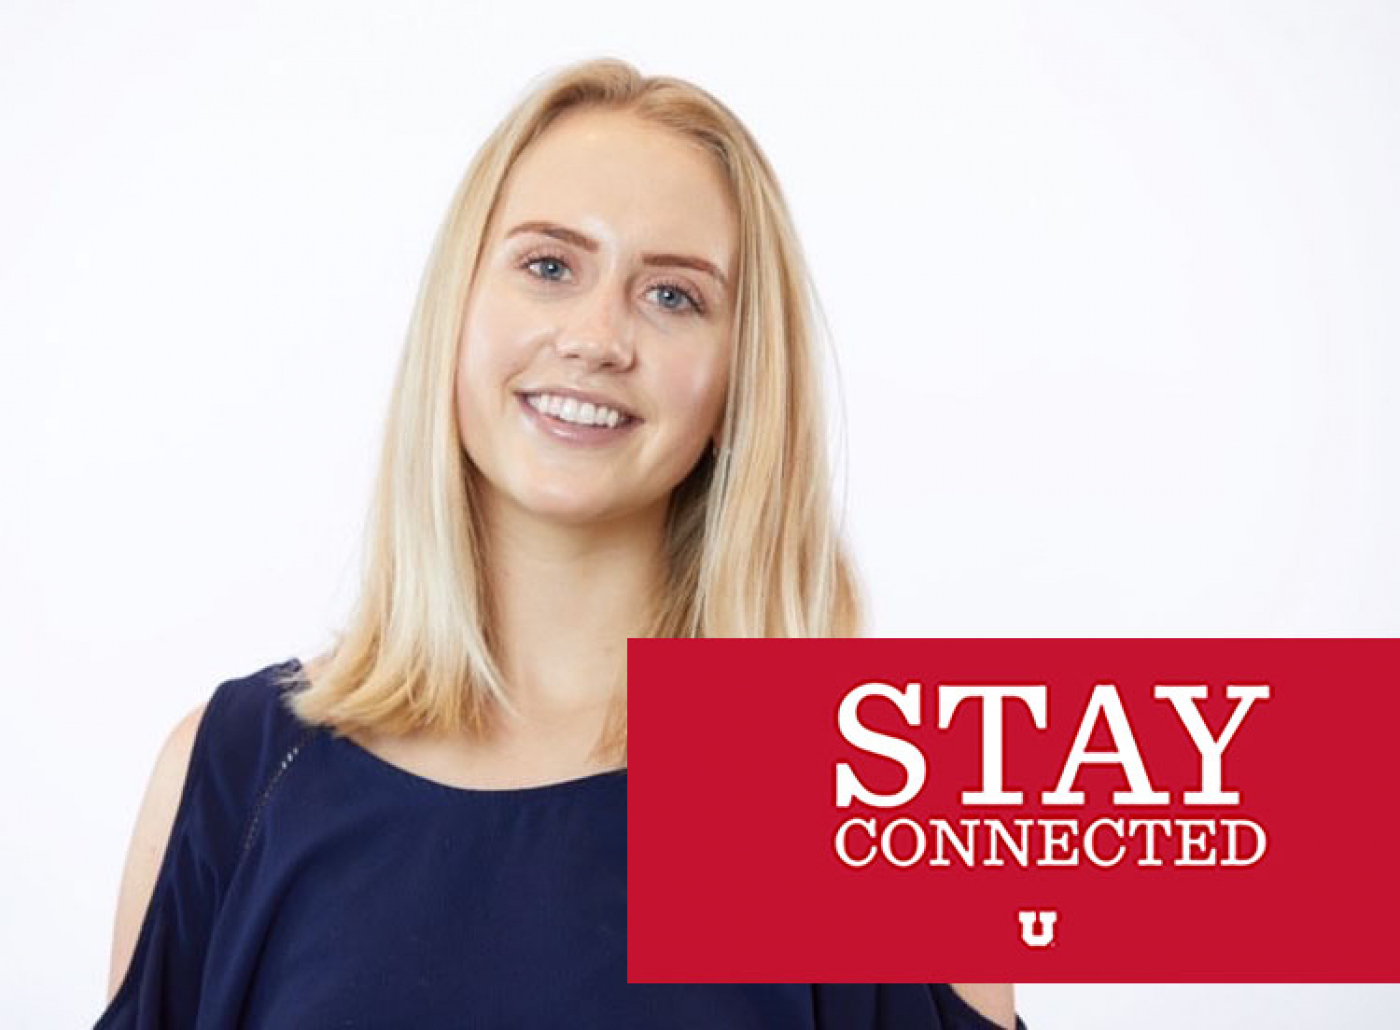 Stay Connected: Shannon Mostrom